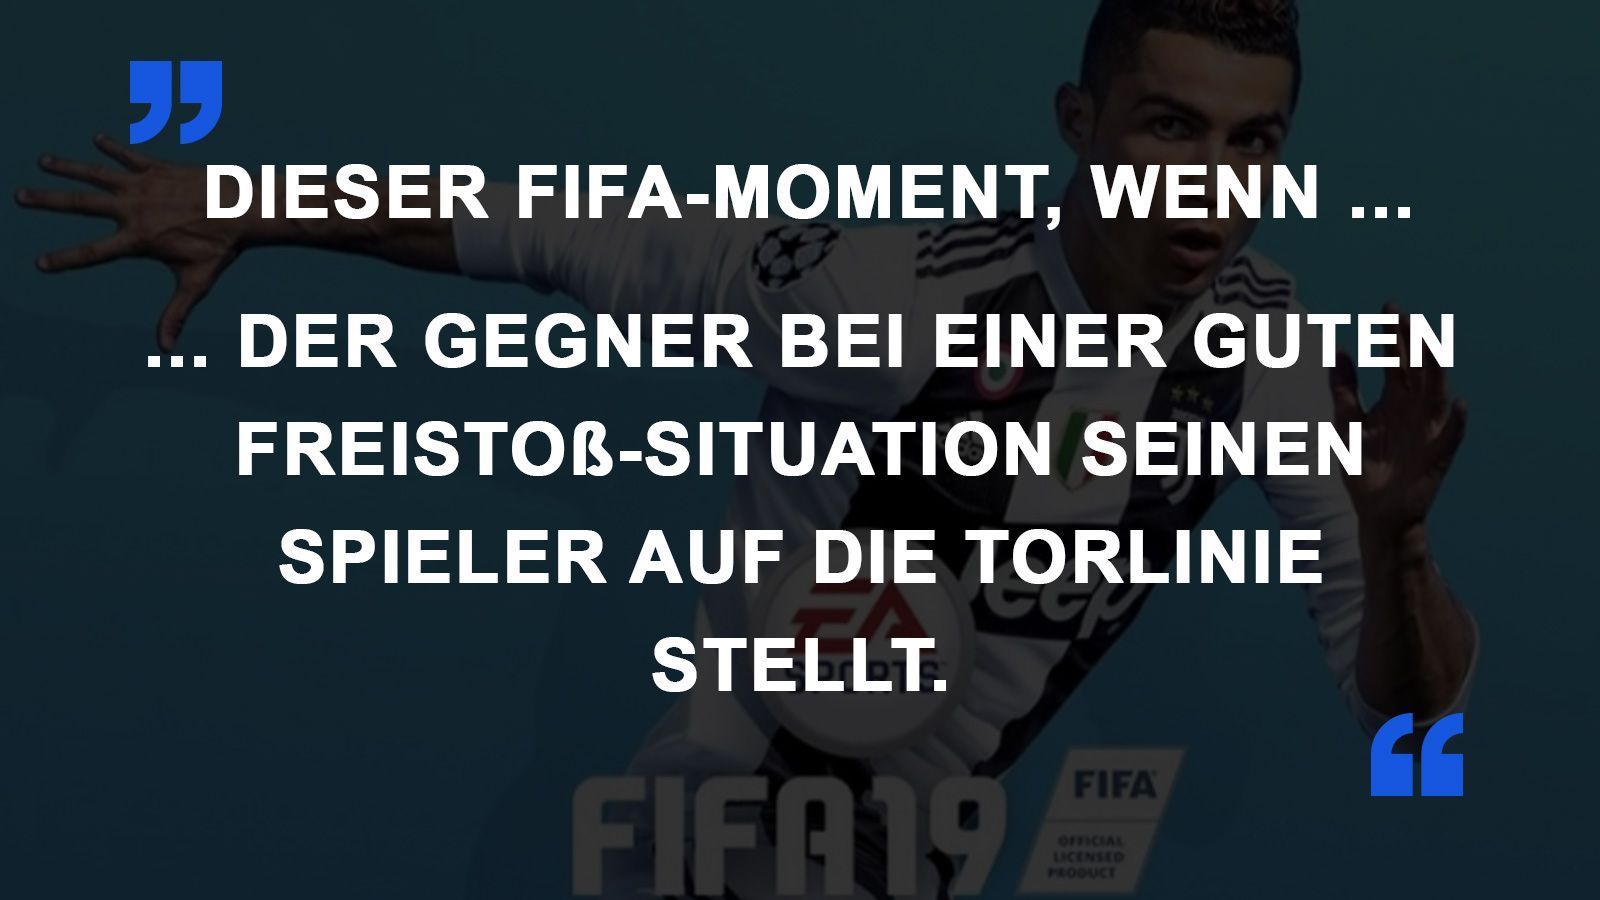 
                <strong>FIFA Momente Torlinie</strong><br>
                
              